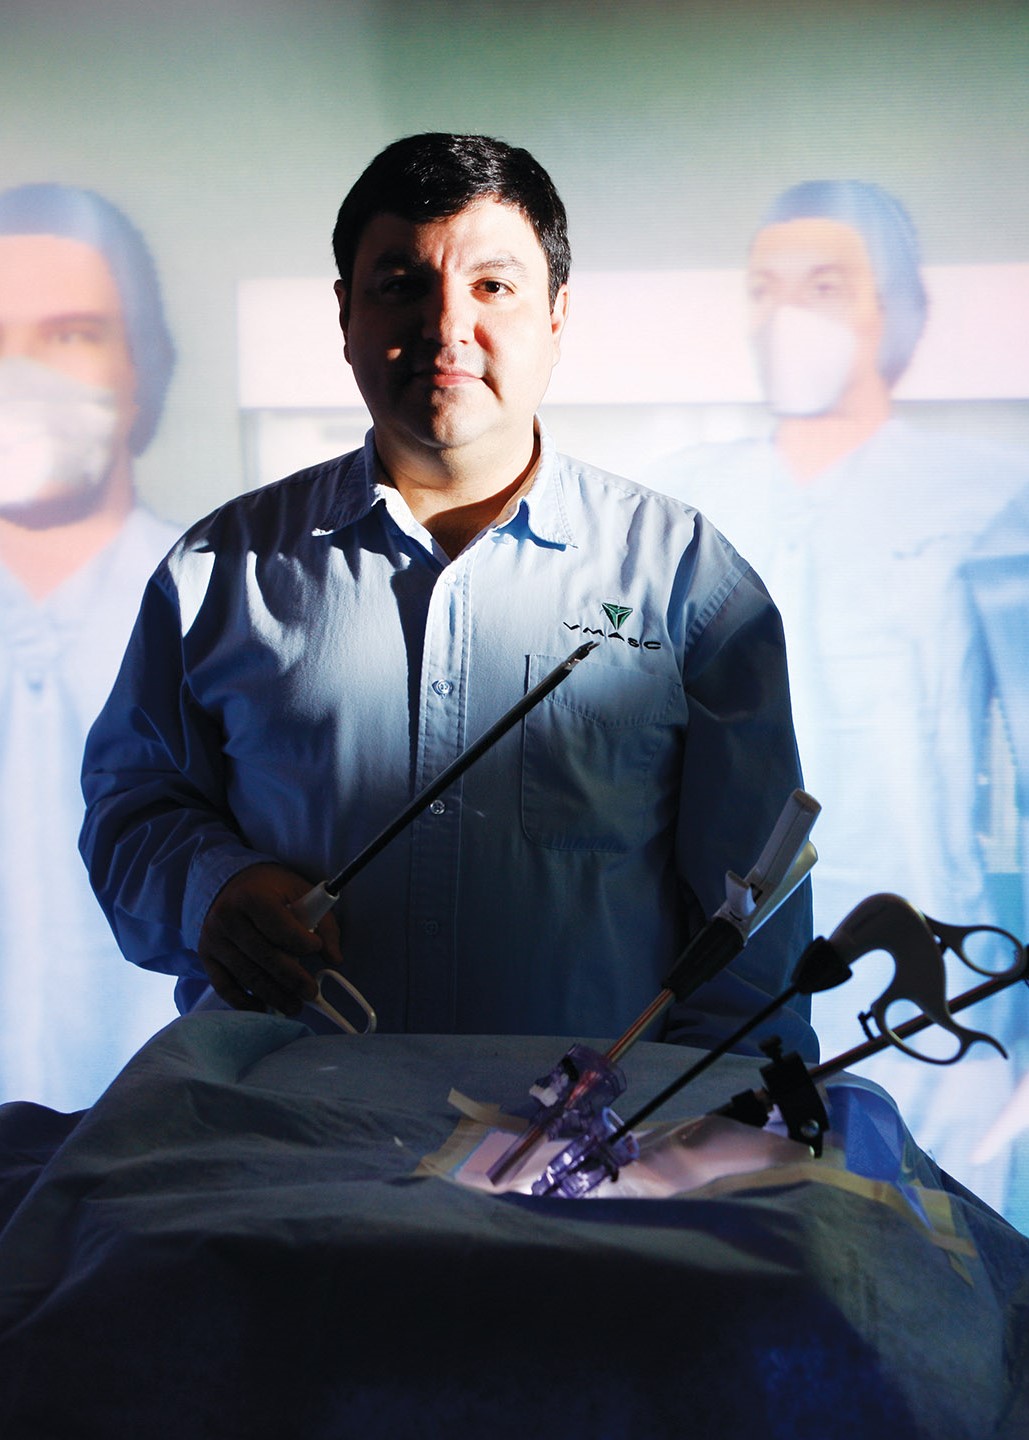 The Virginia Modeling, Analysis, and Simulation Center's Virtual Operating Room